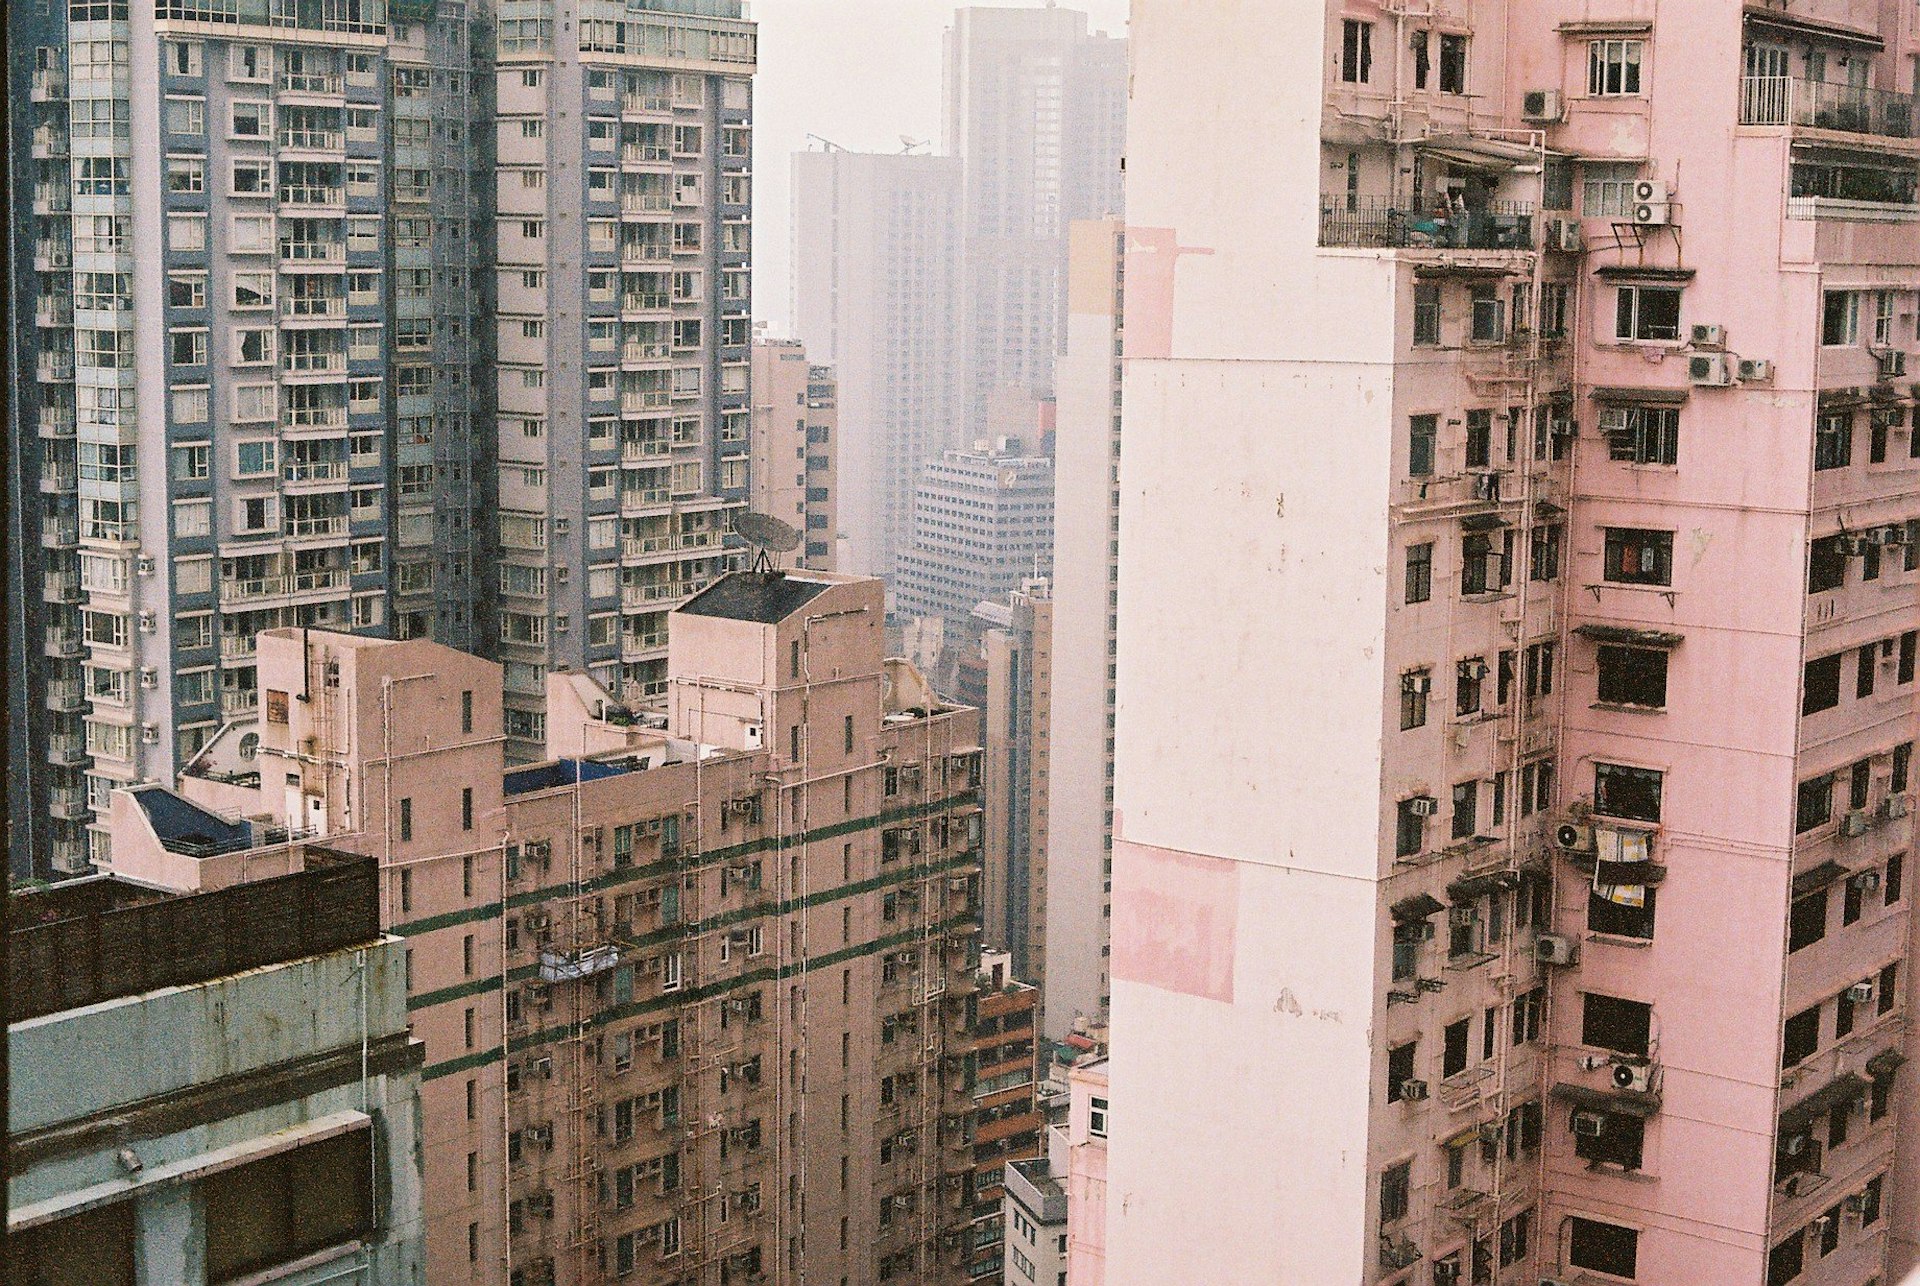 Visions in the smog: Hong Kong shot on film